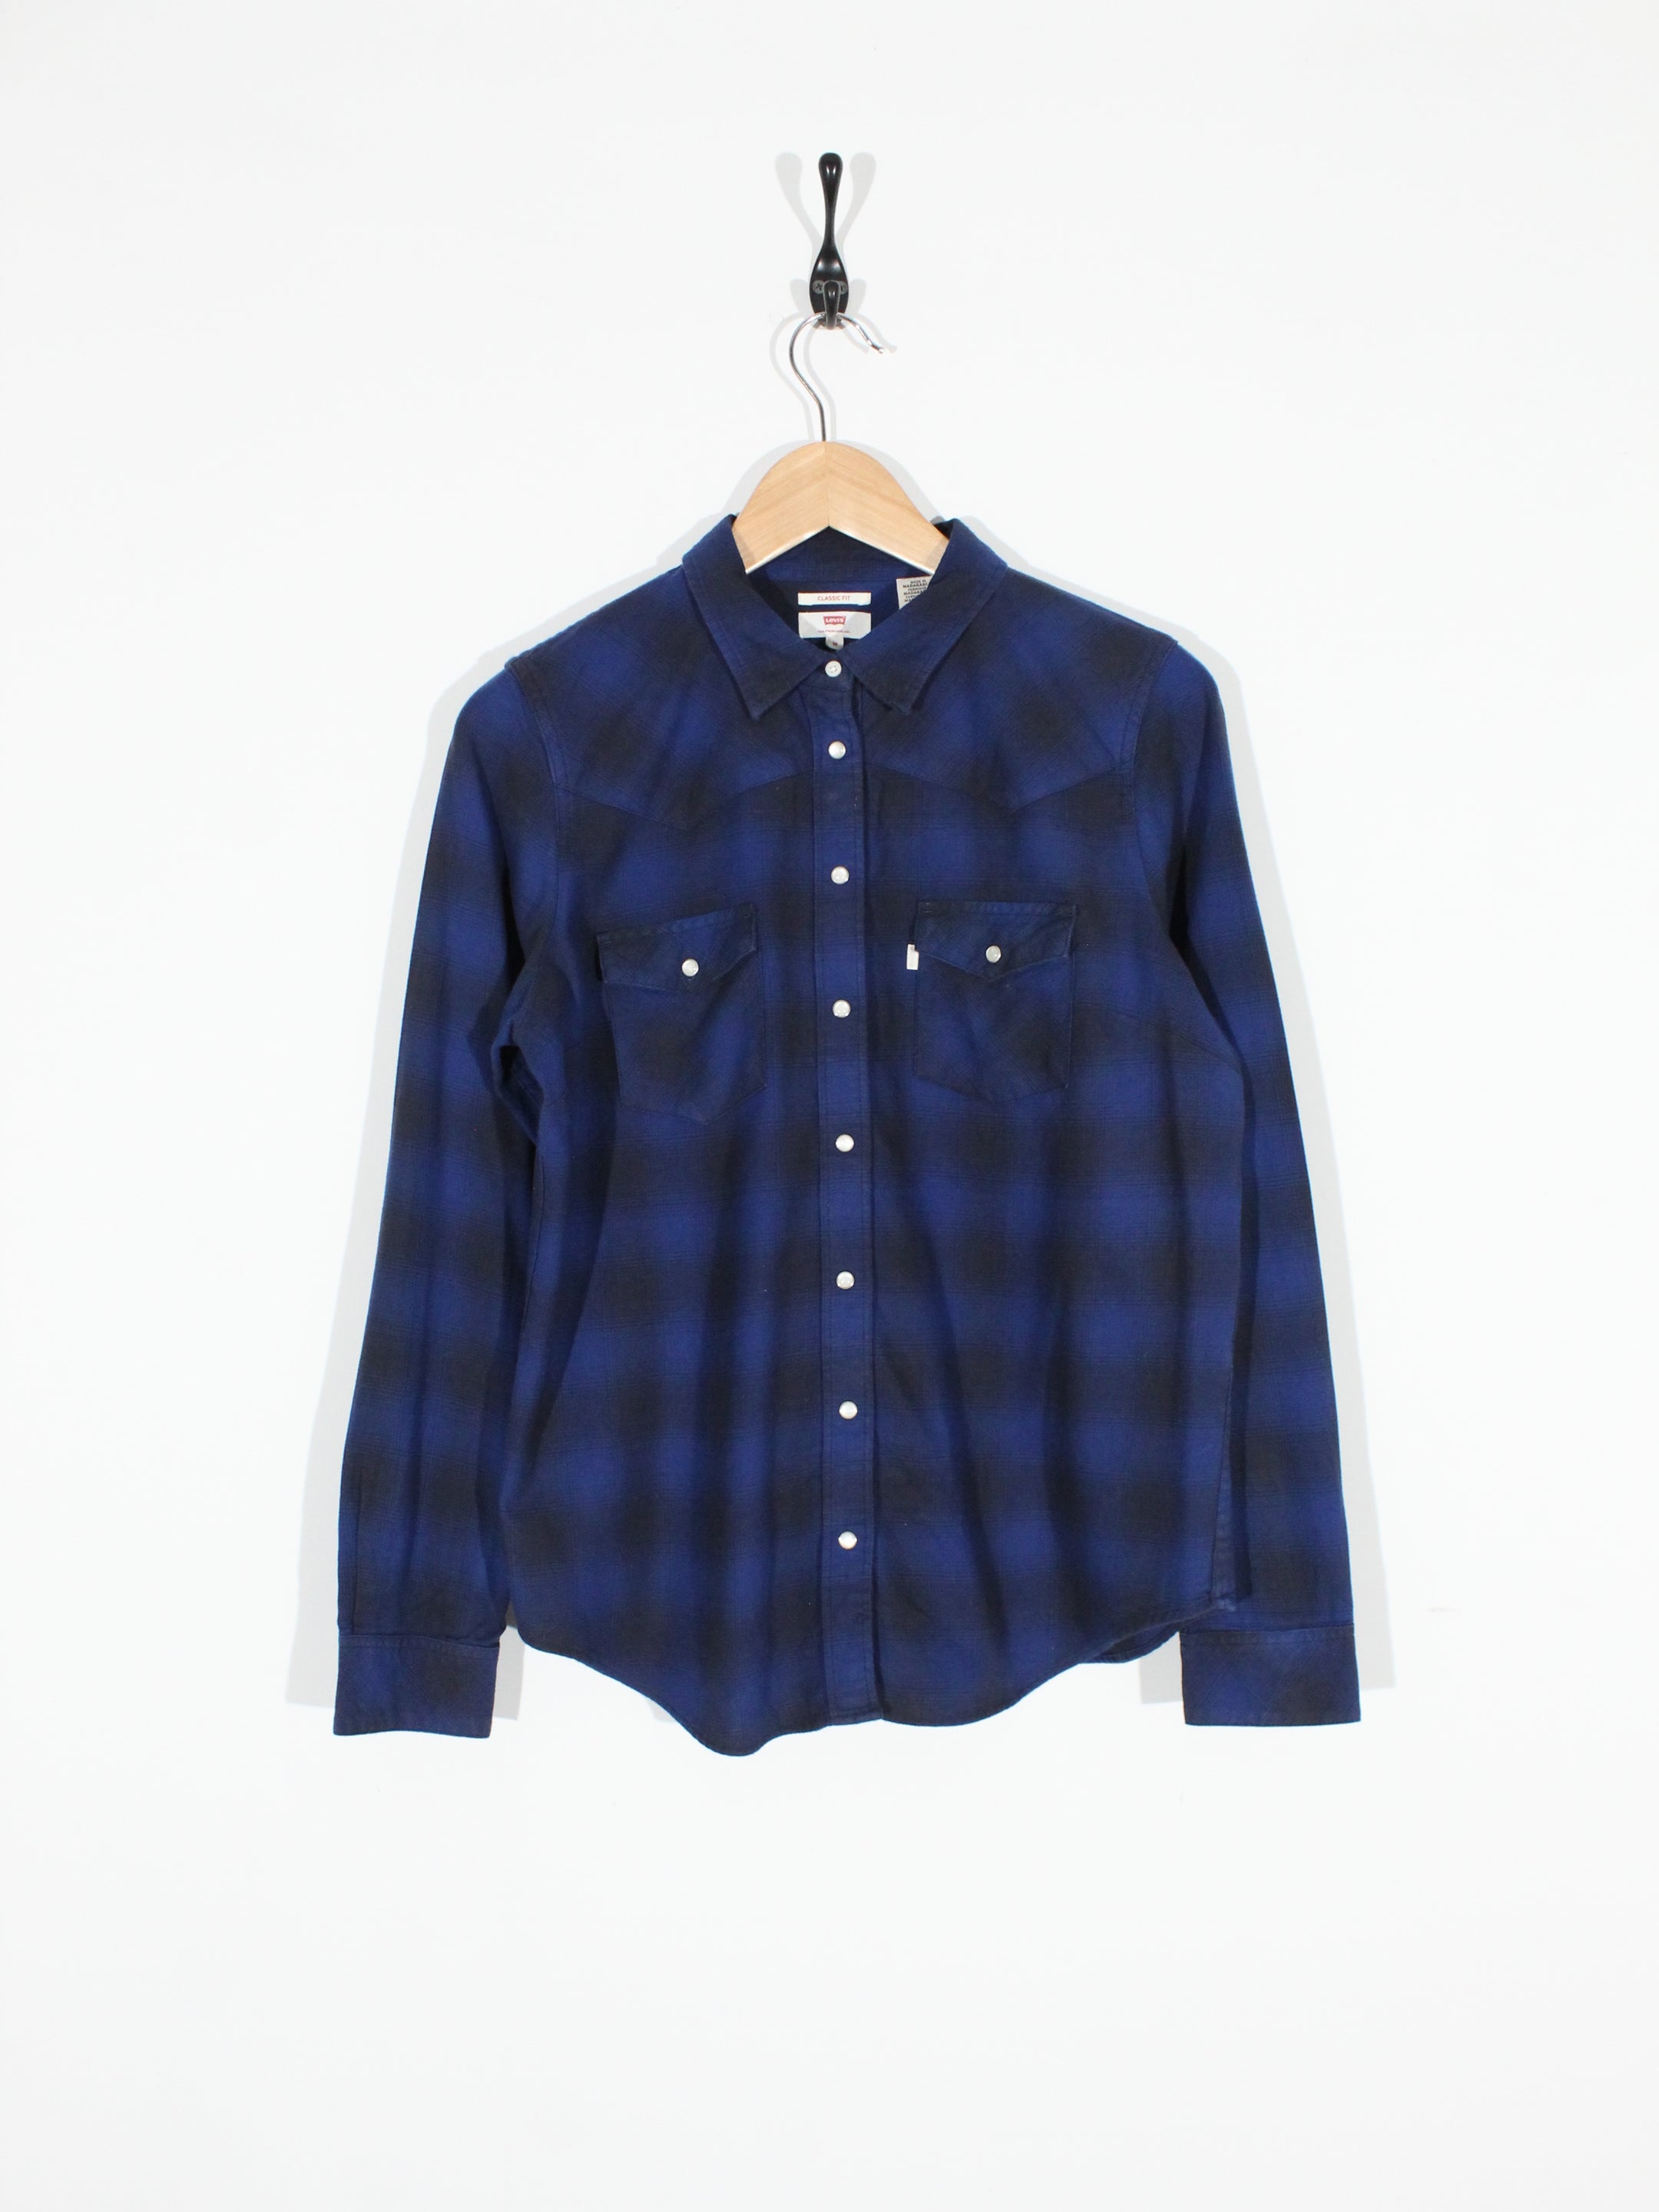 Levis Checked Flannel Shirt (M)